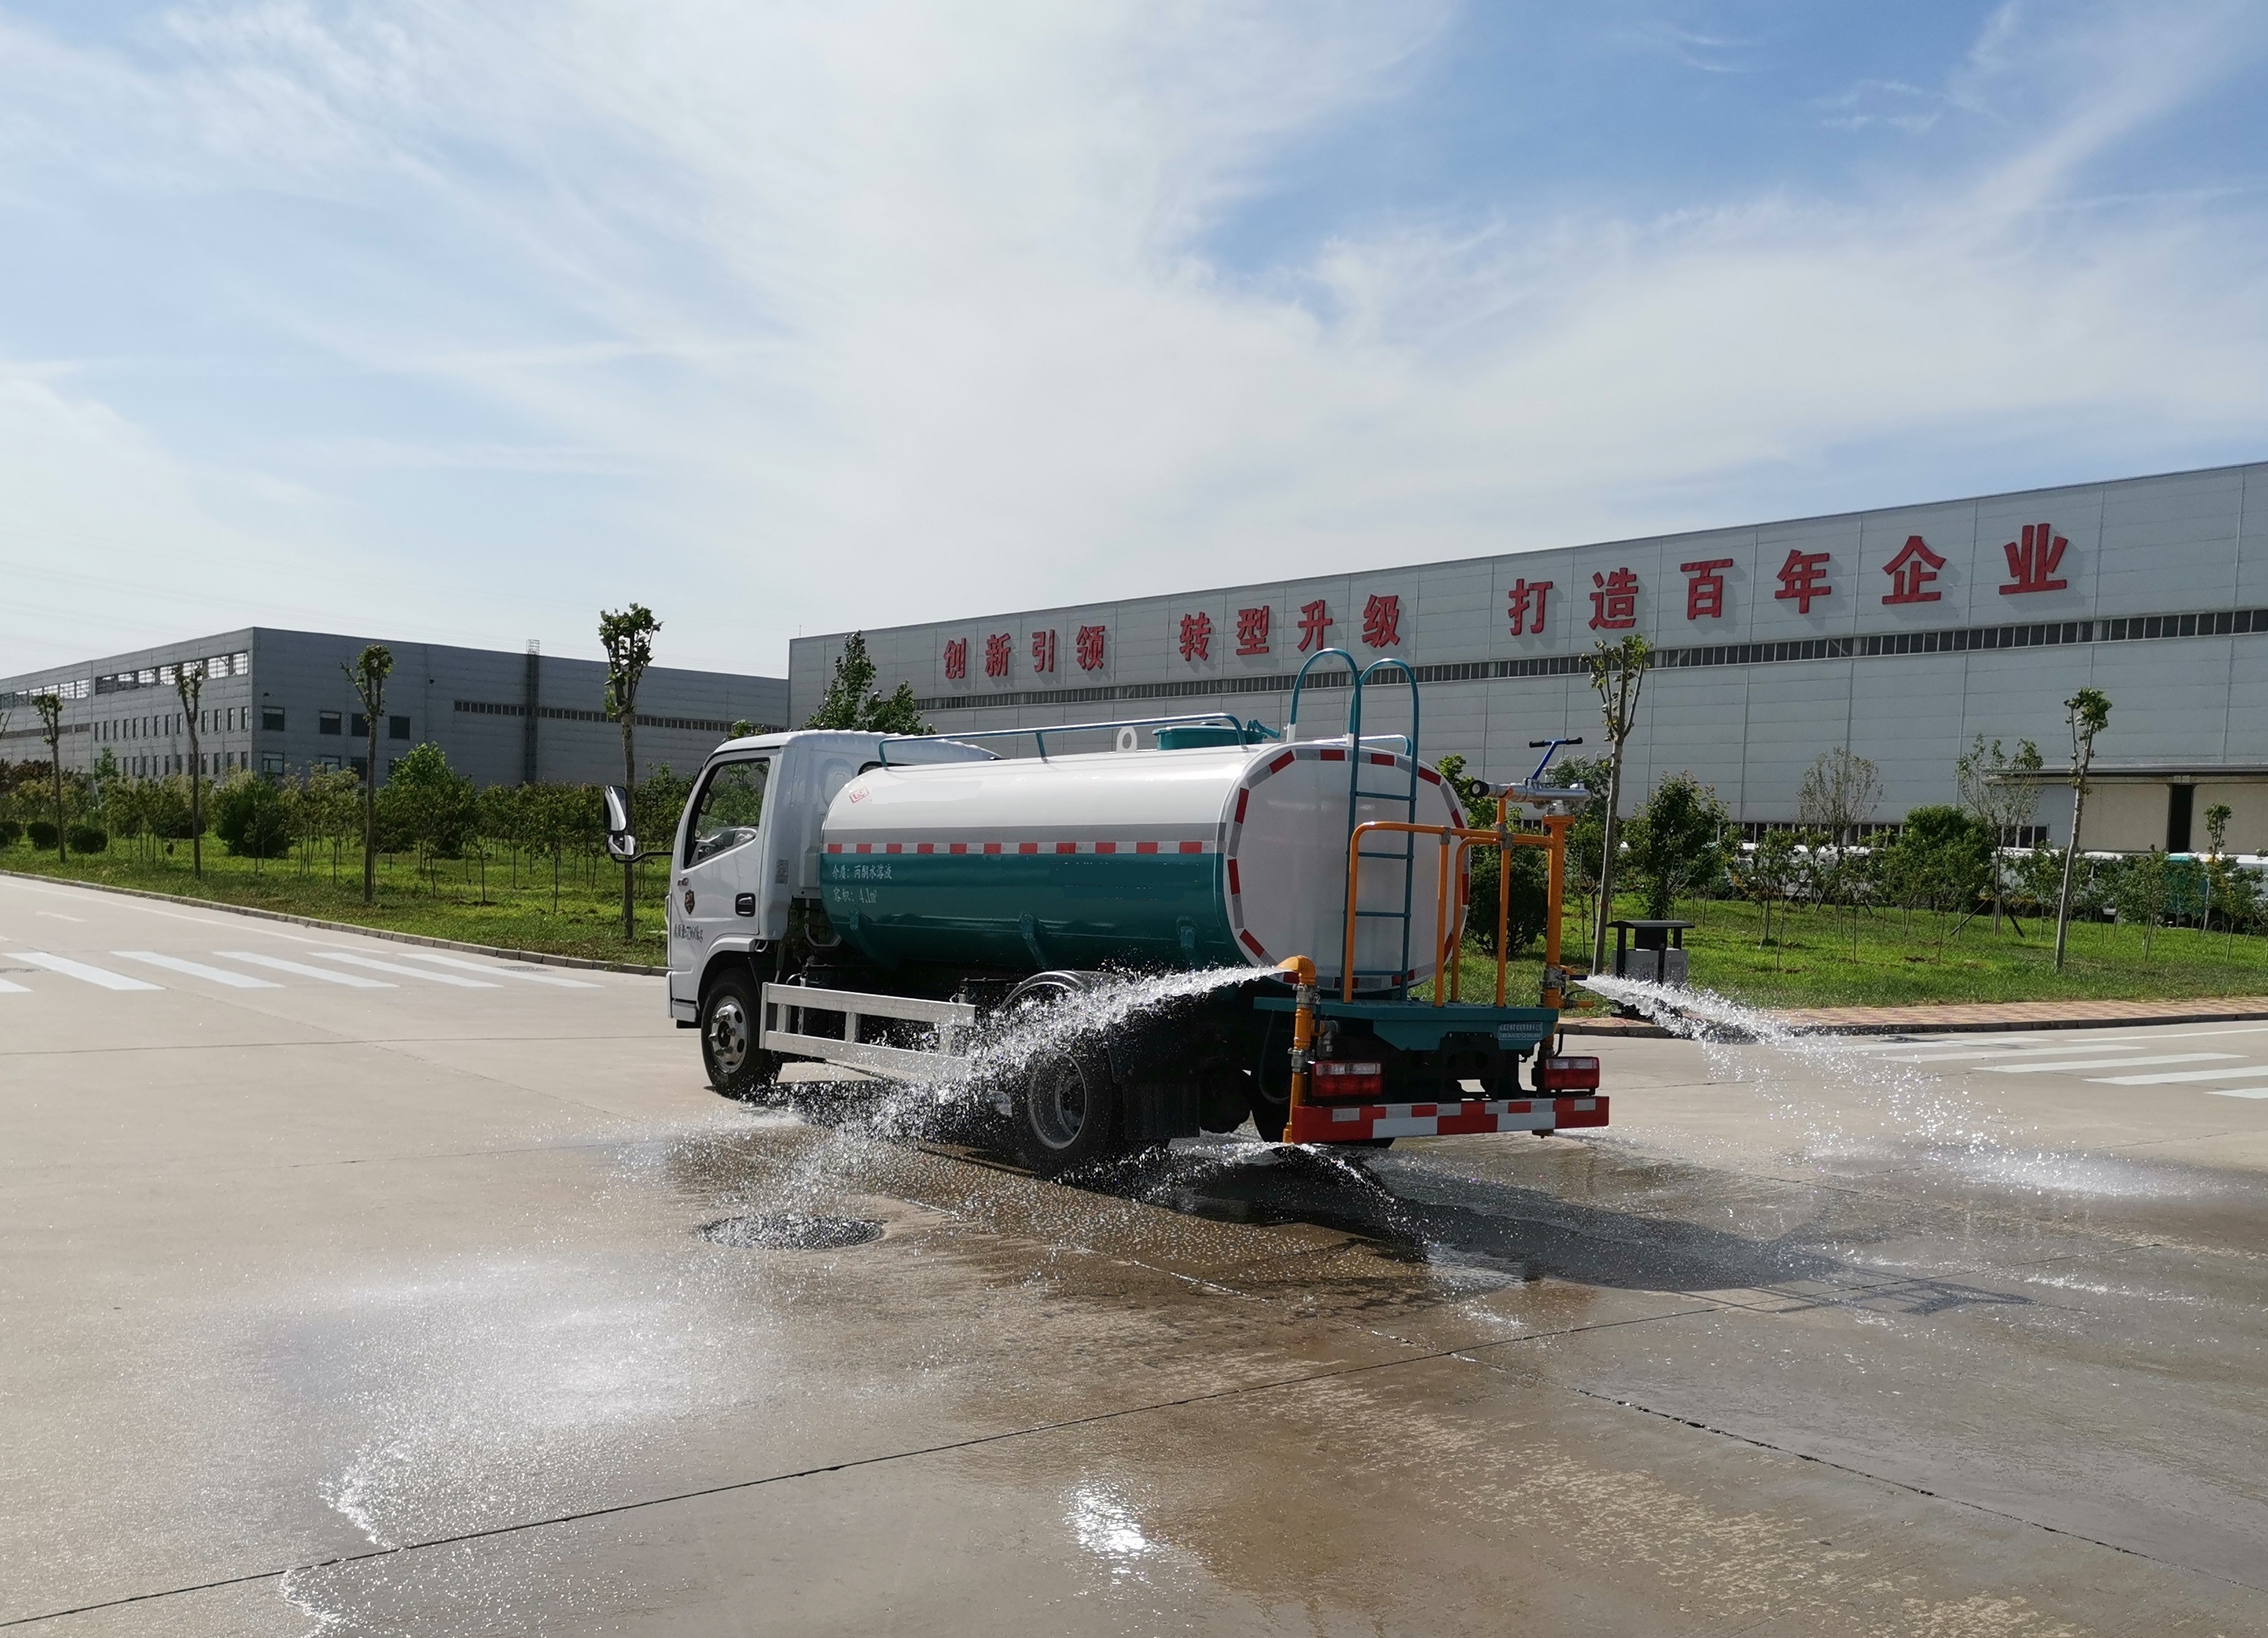 Road Washing Vehicle (Road Cleaner)